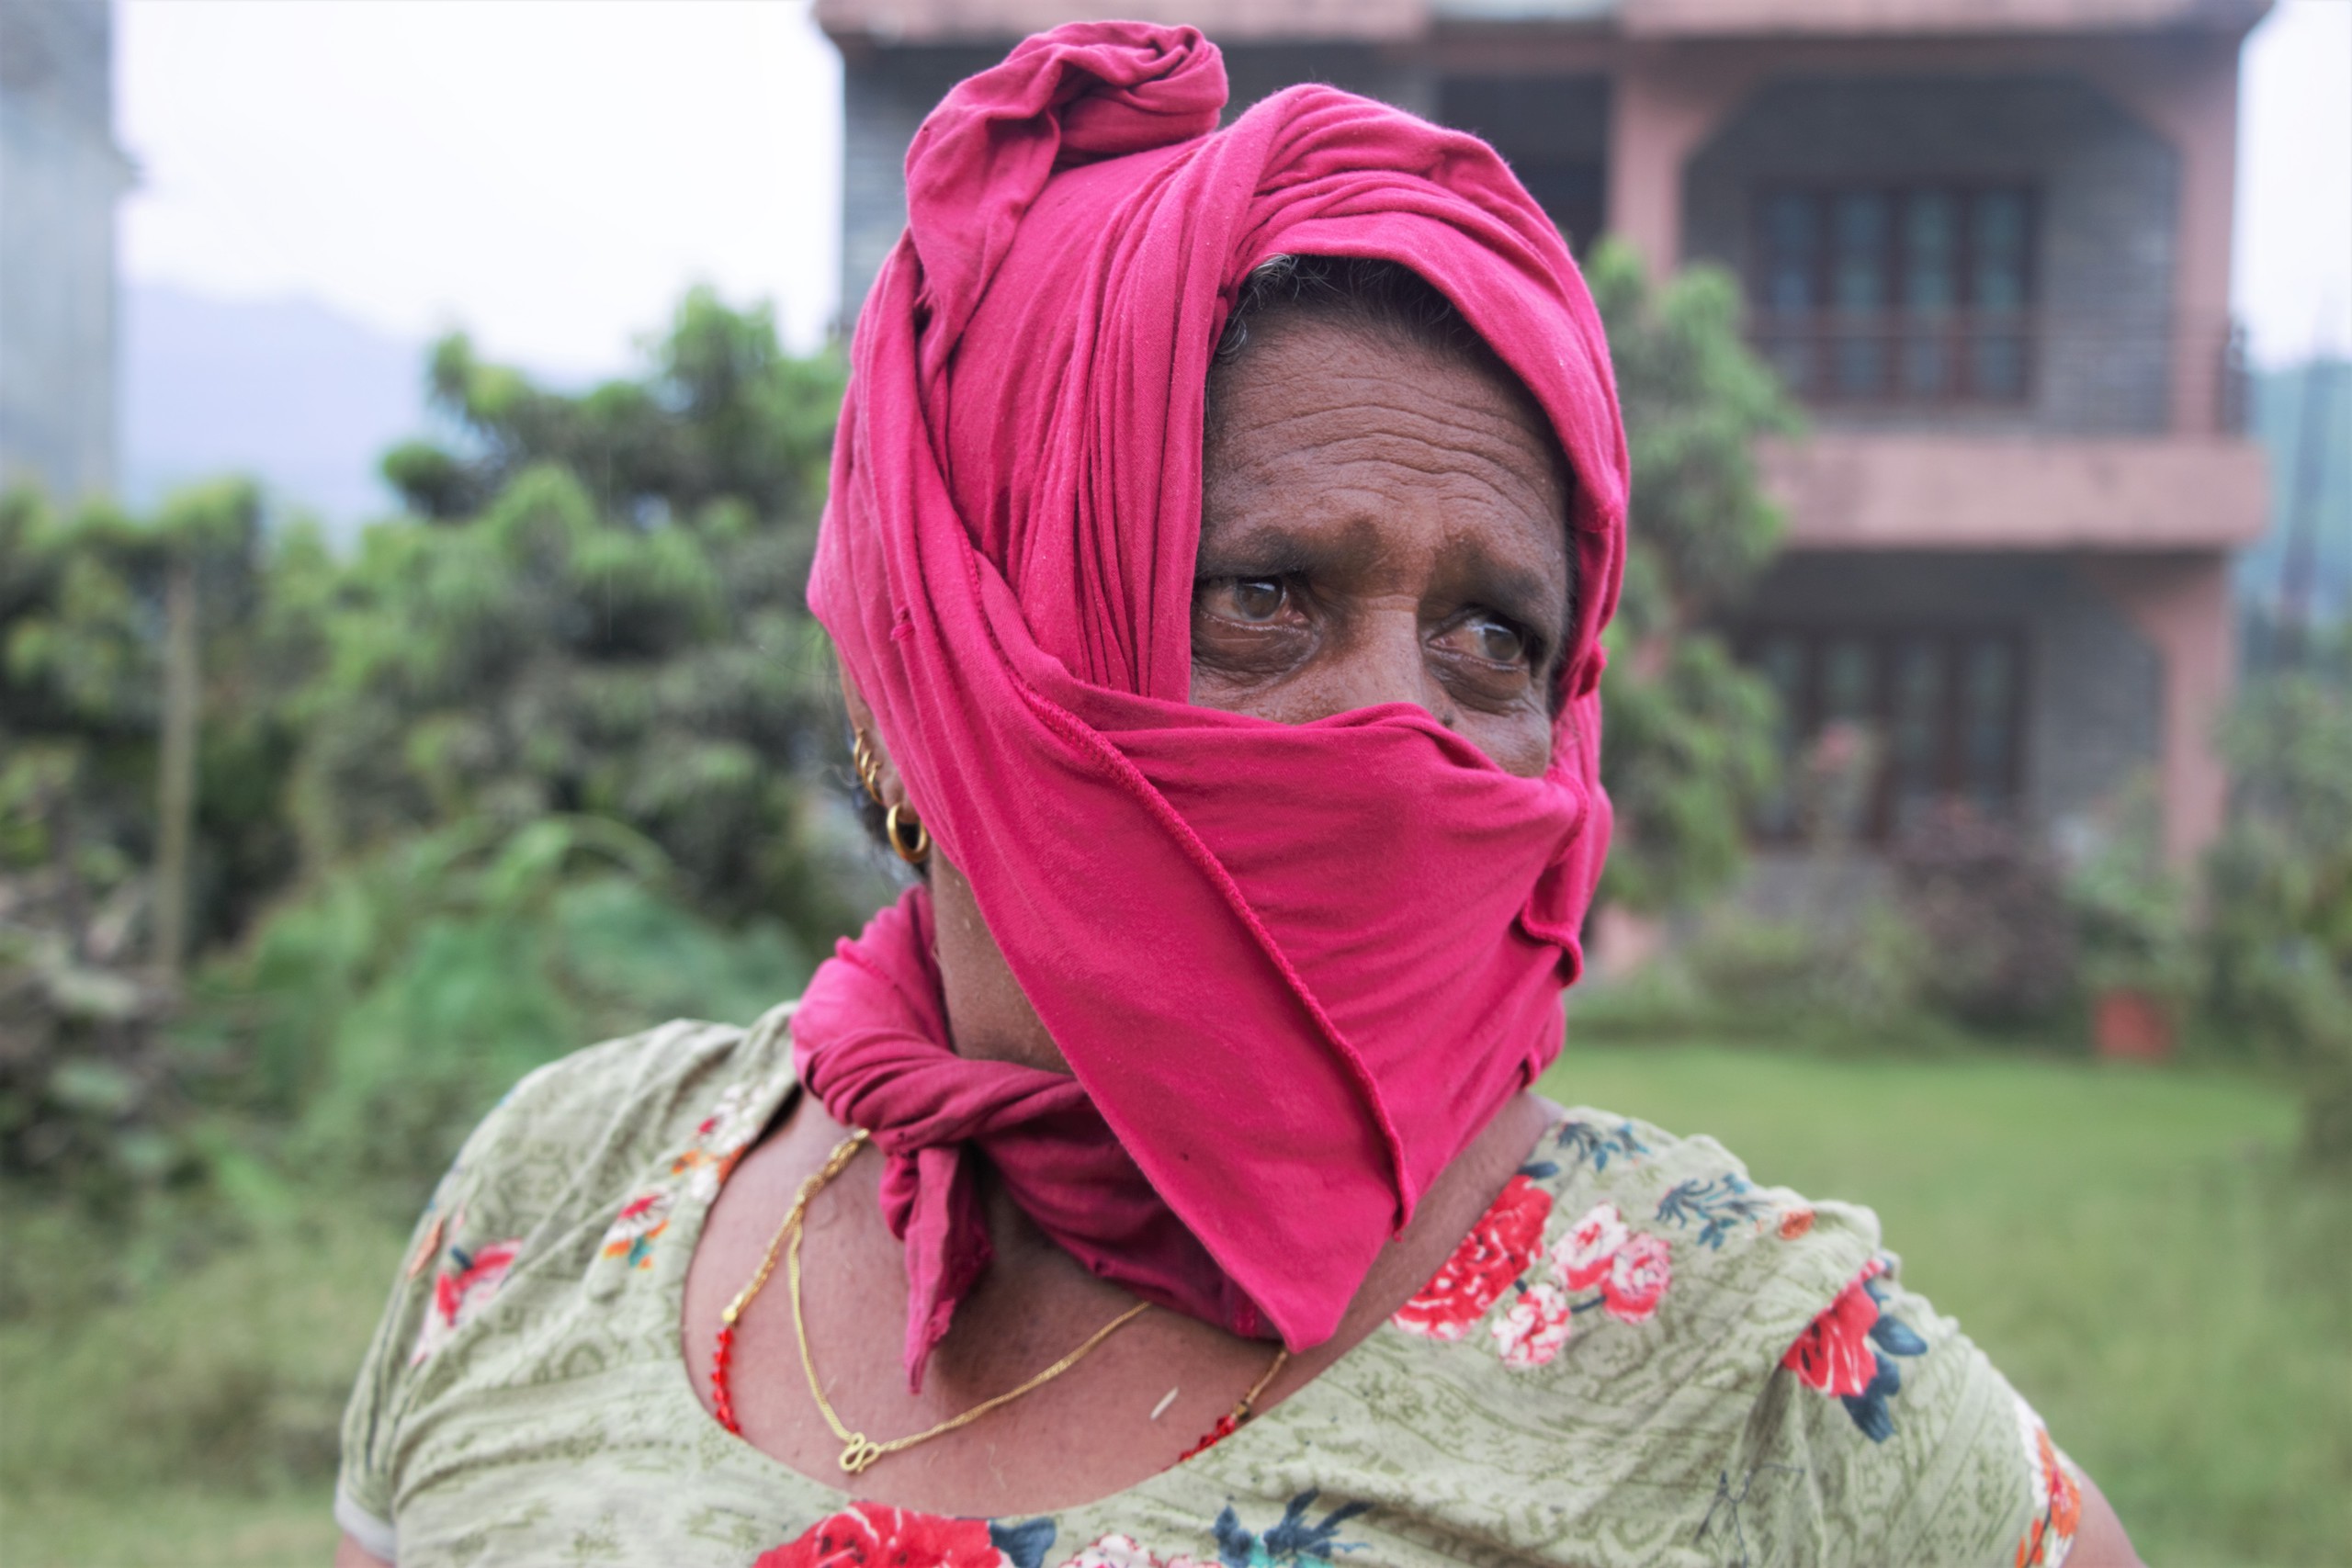 <p>Samita Ghimire, who lives alongside a highway expansion project in western Nepal, covers her face to protect against dust pollution. Steps to reduce air pollution recommended in the project’s environmental impact have seemingly not been carried out. (Image: Ramesh Bhushal)</p>